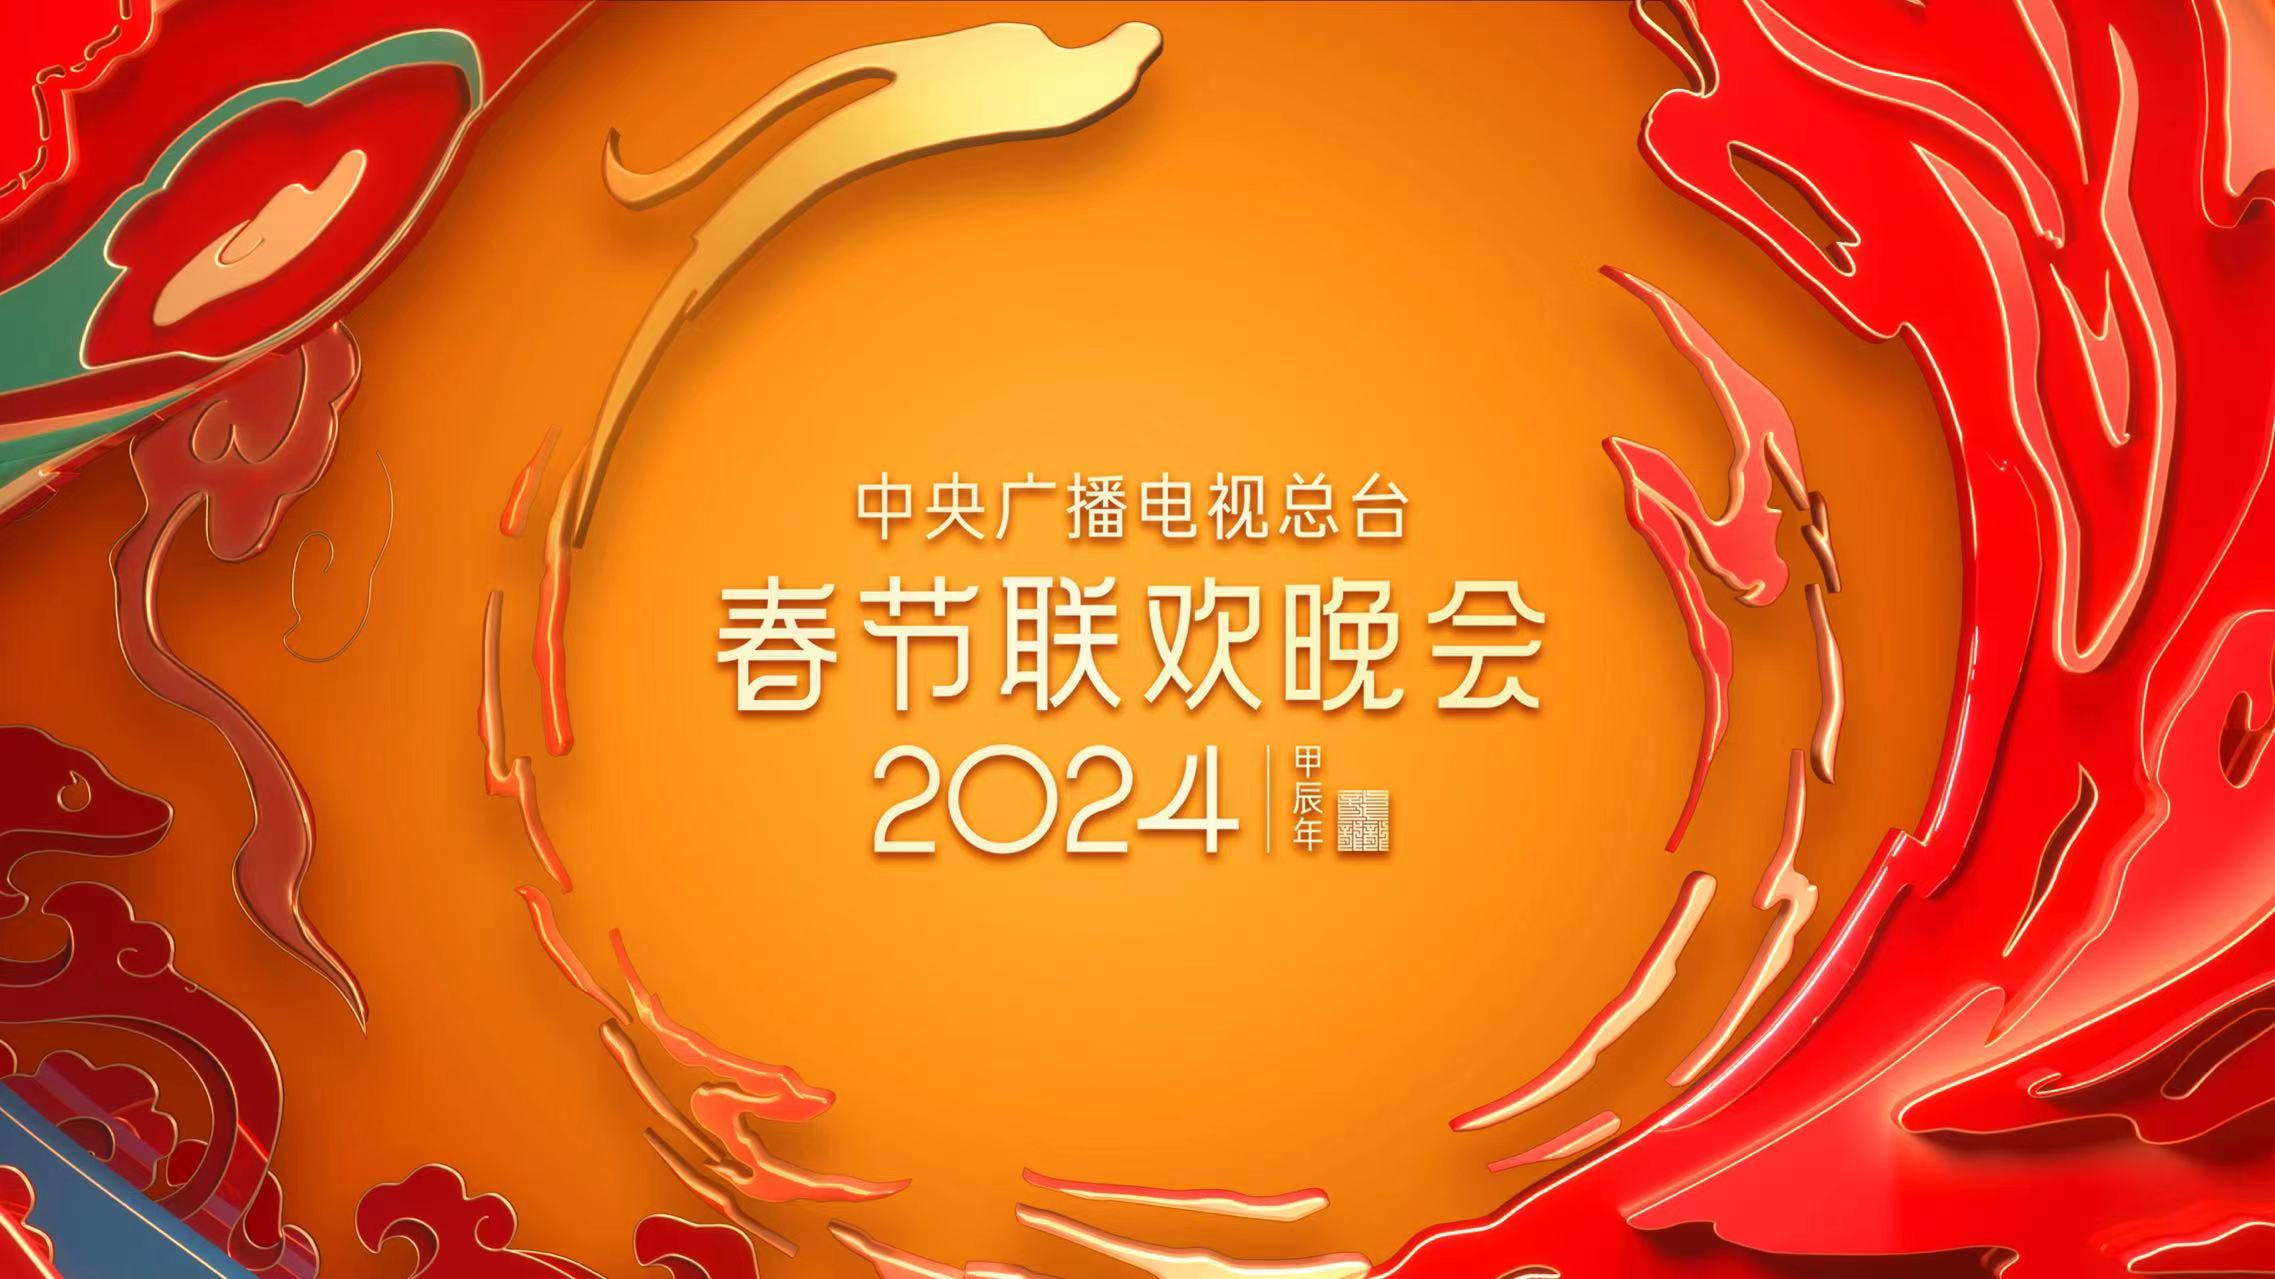 Official poster of the CMG 2024 Spring Festival Gala. /CMG